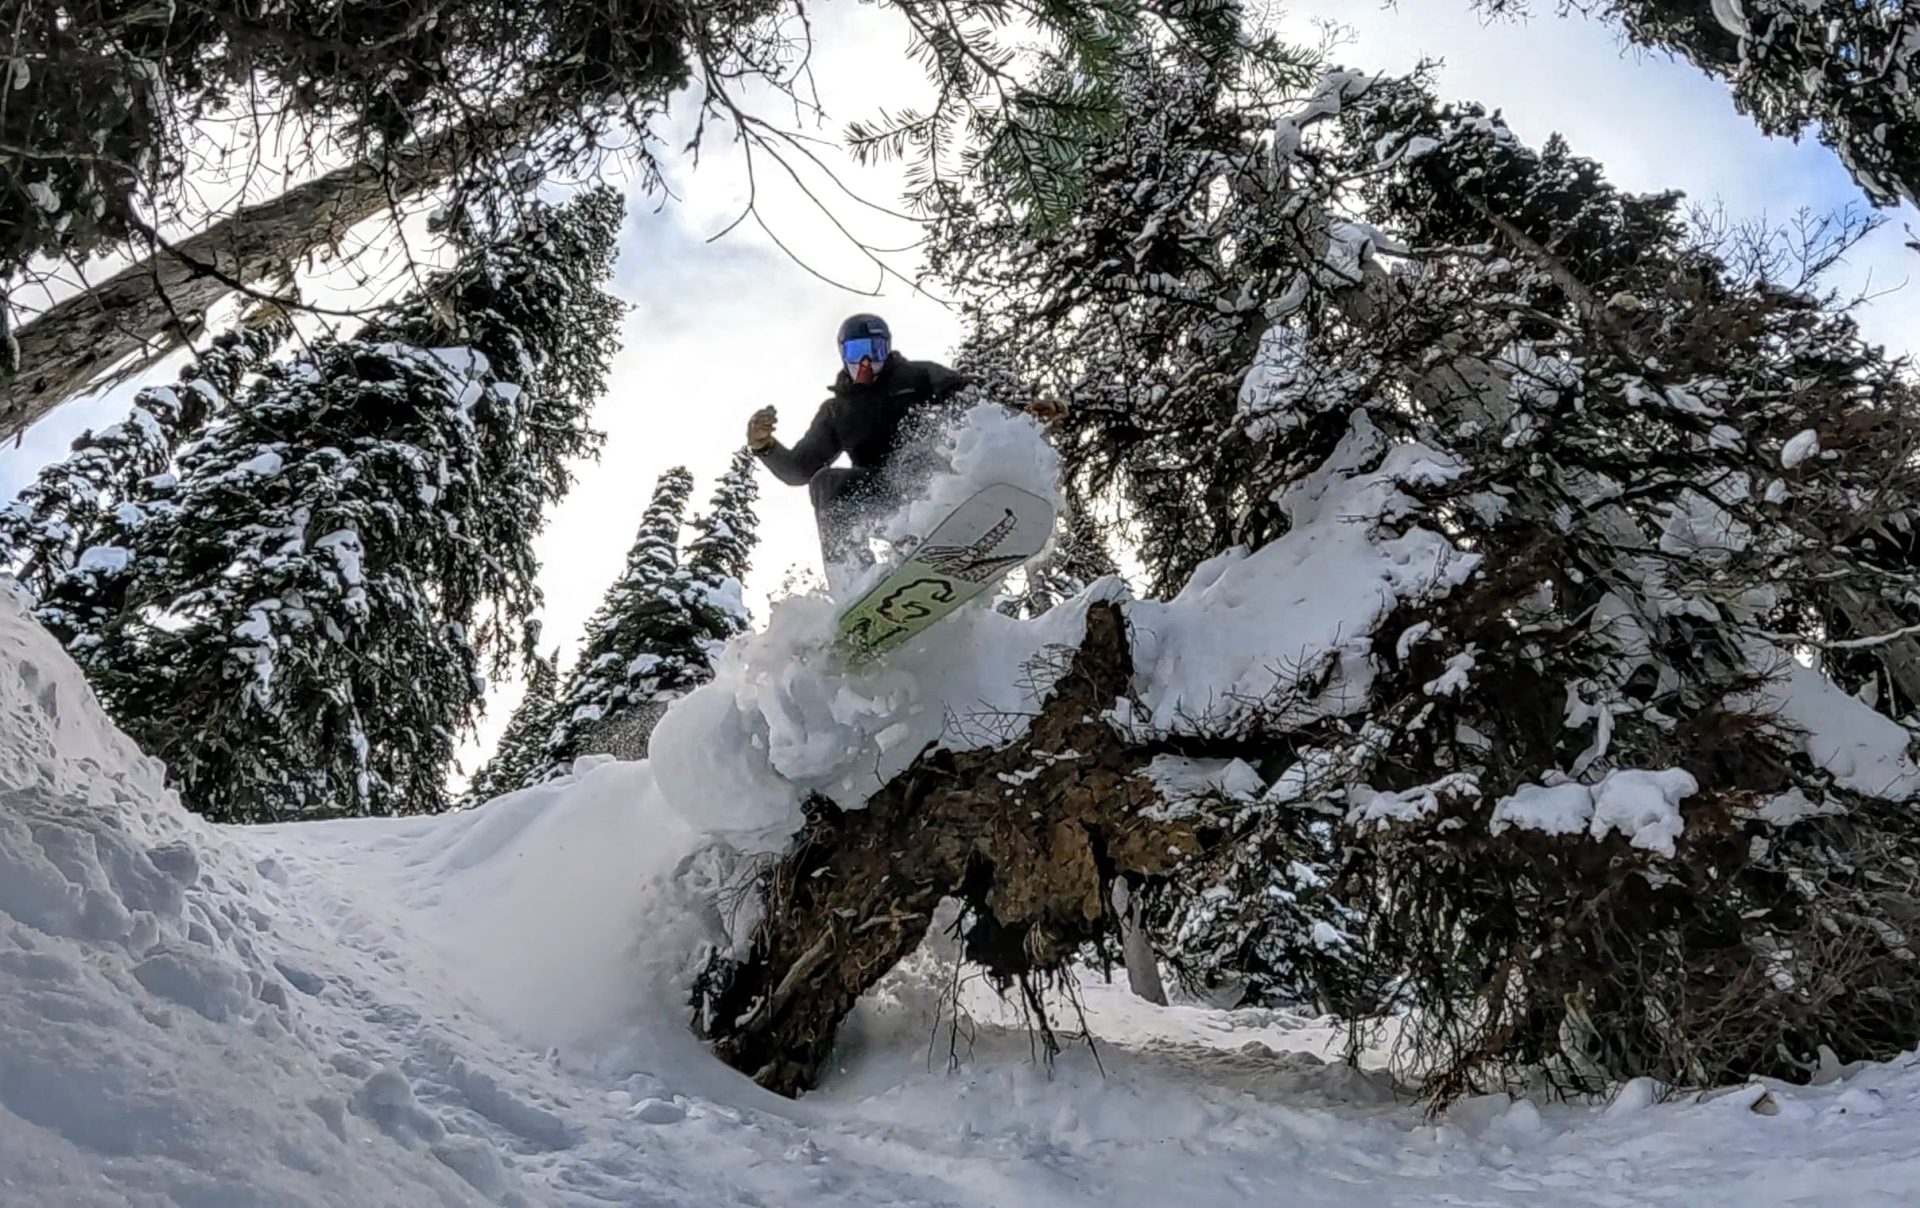 A snowboarder uses a trees stump to add excitement to his powder day